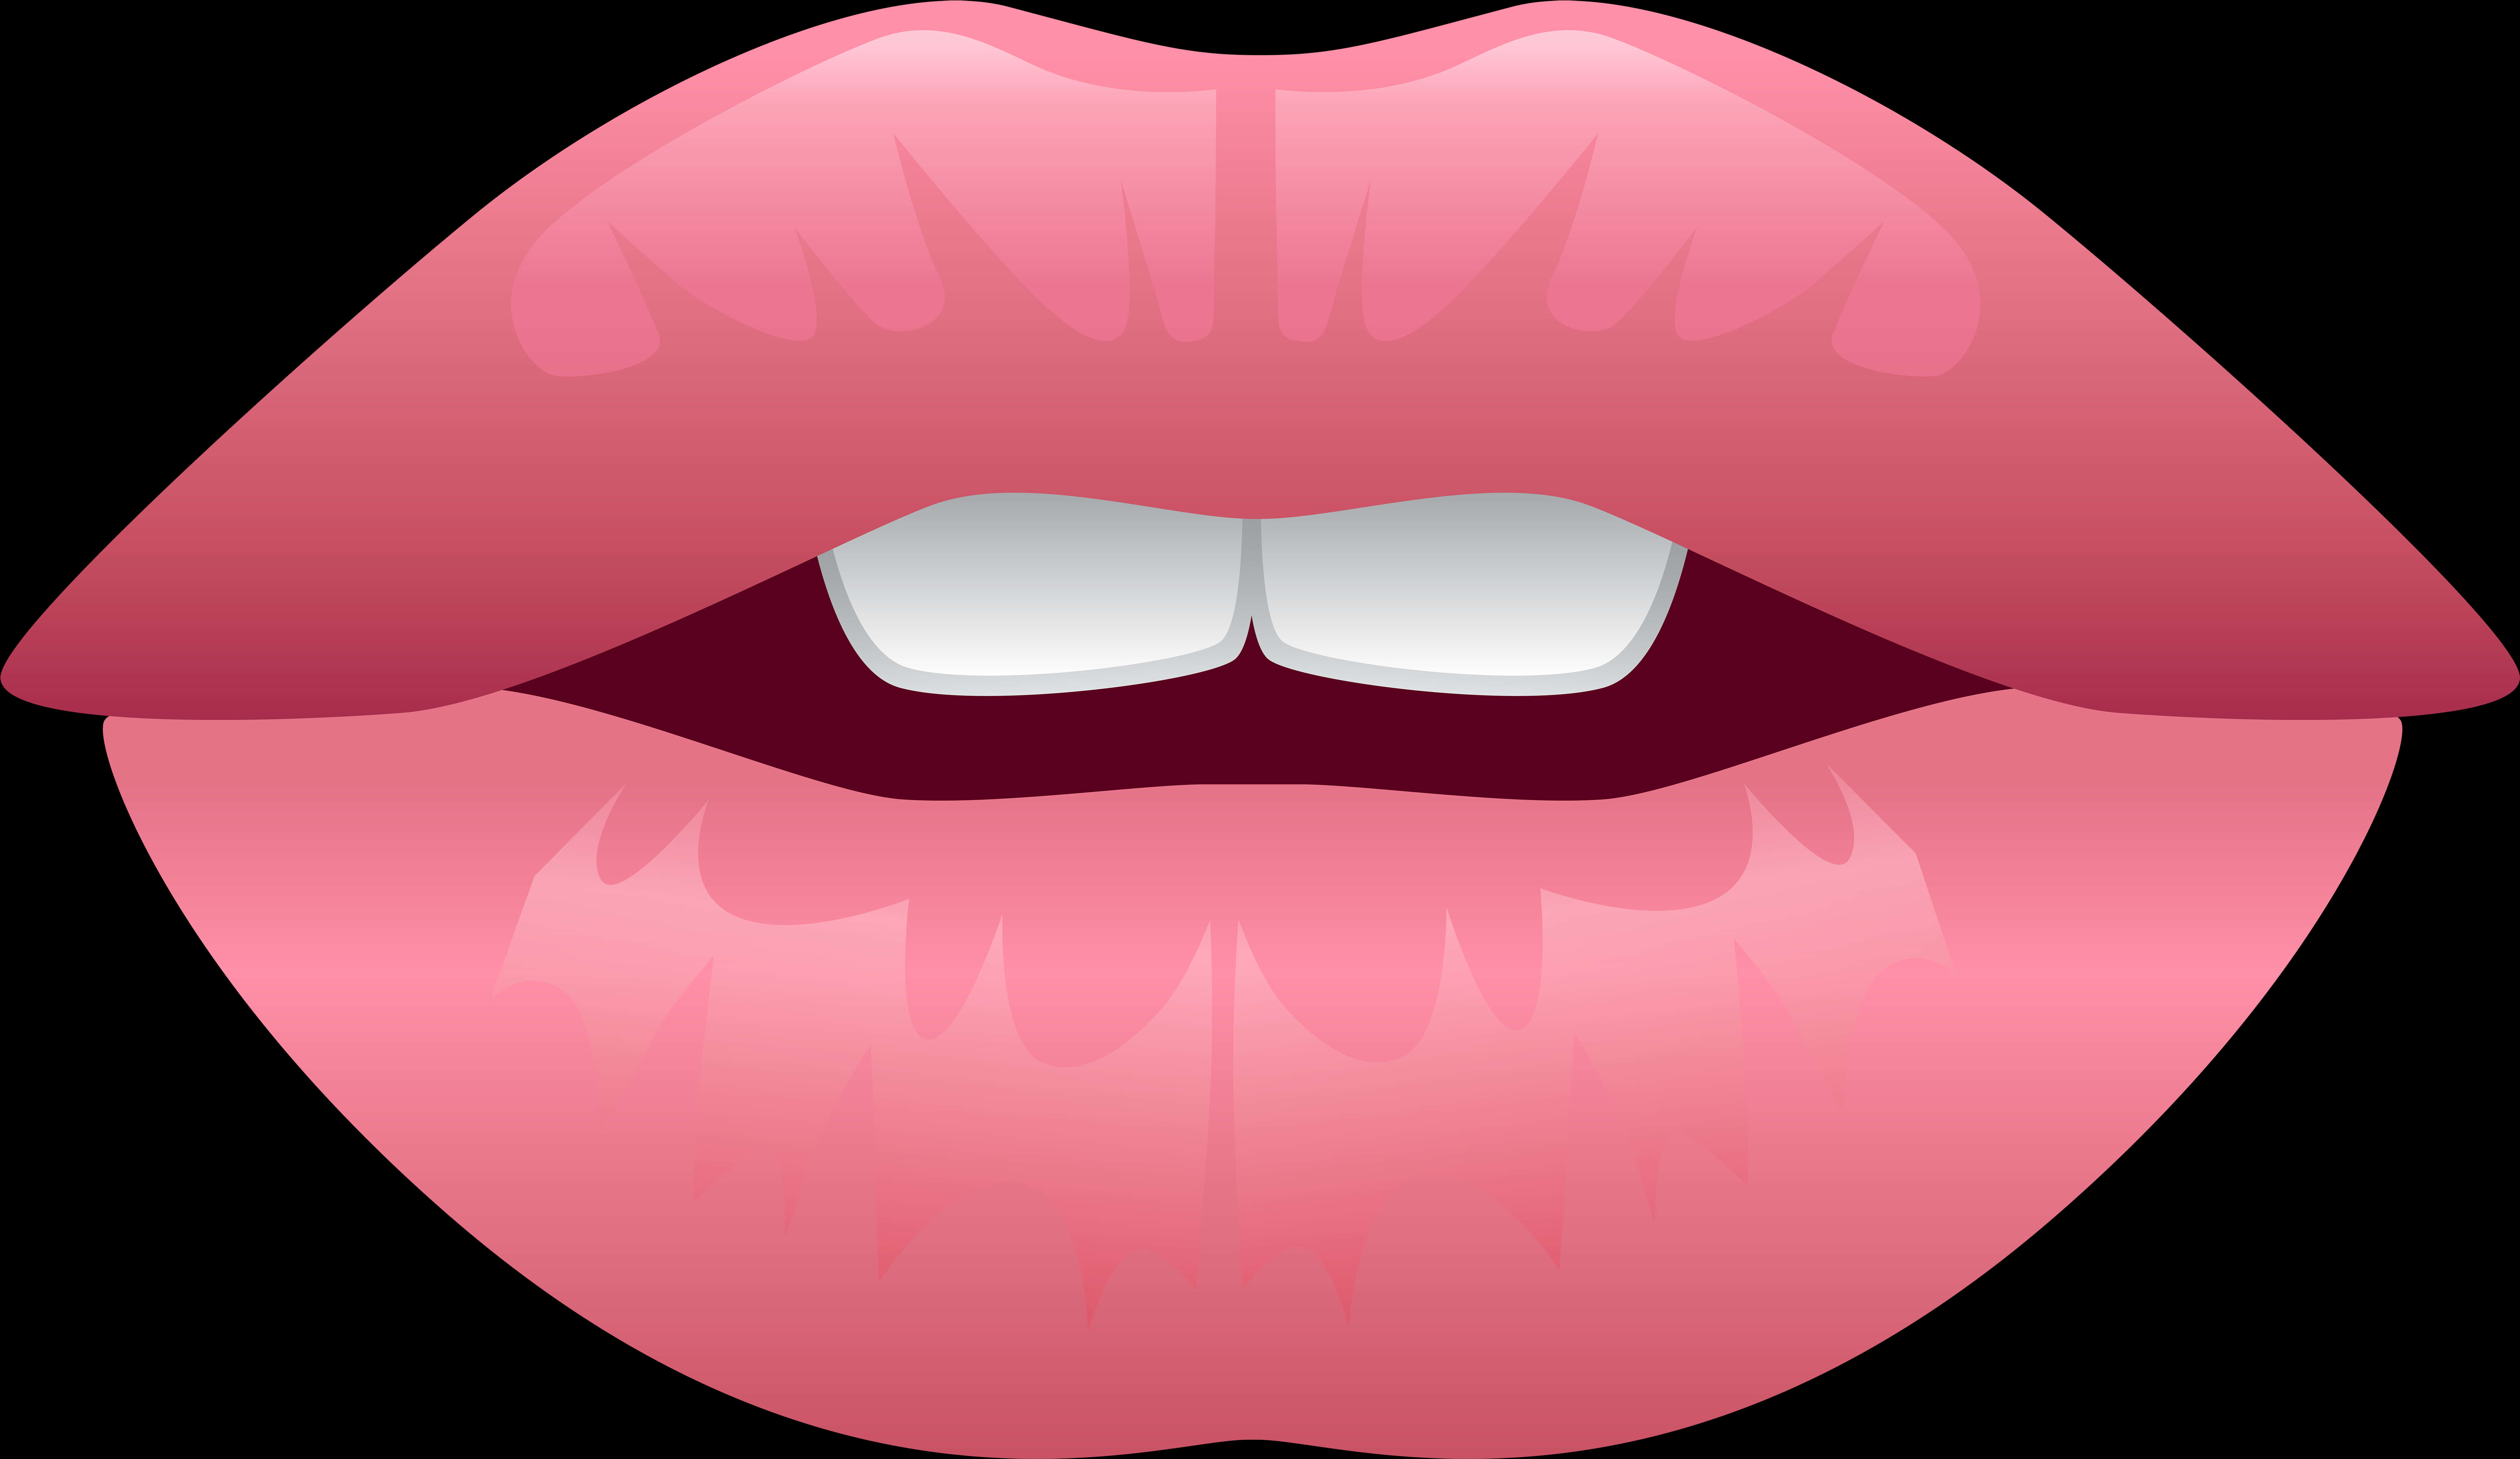 Glossy Pink Lips Vector Illustration PNG